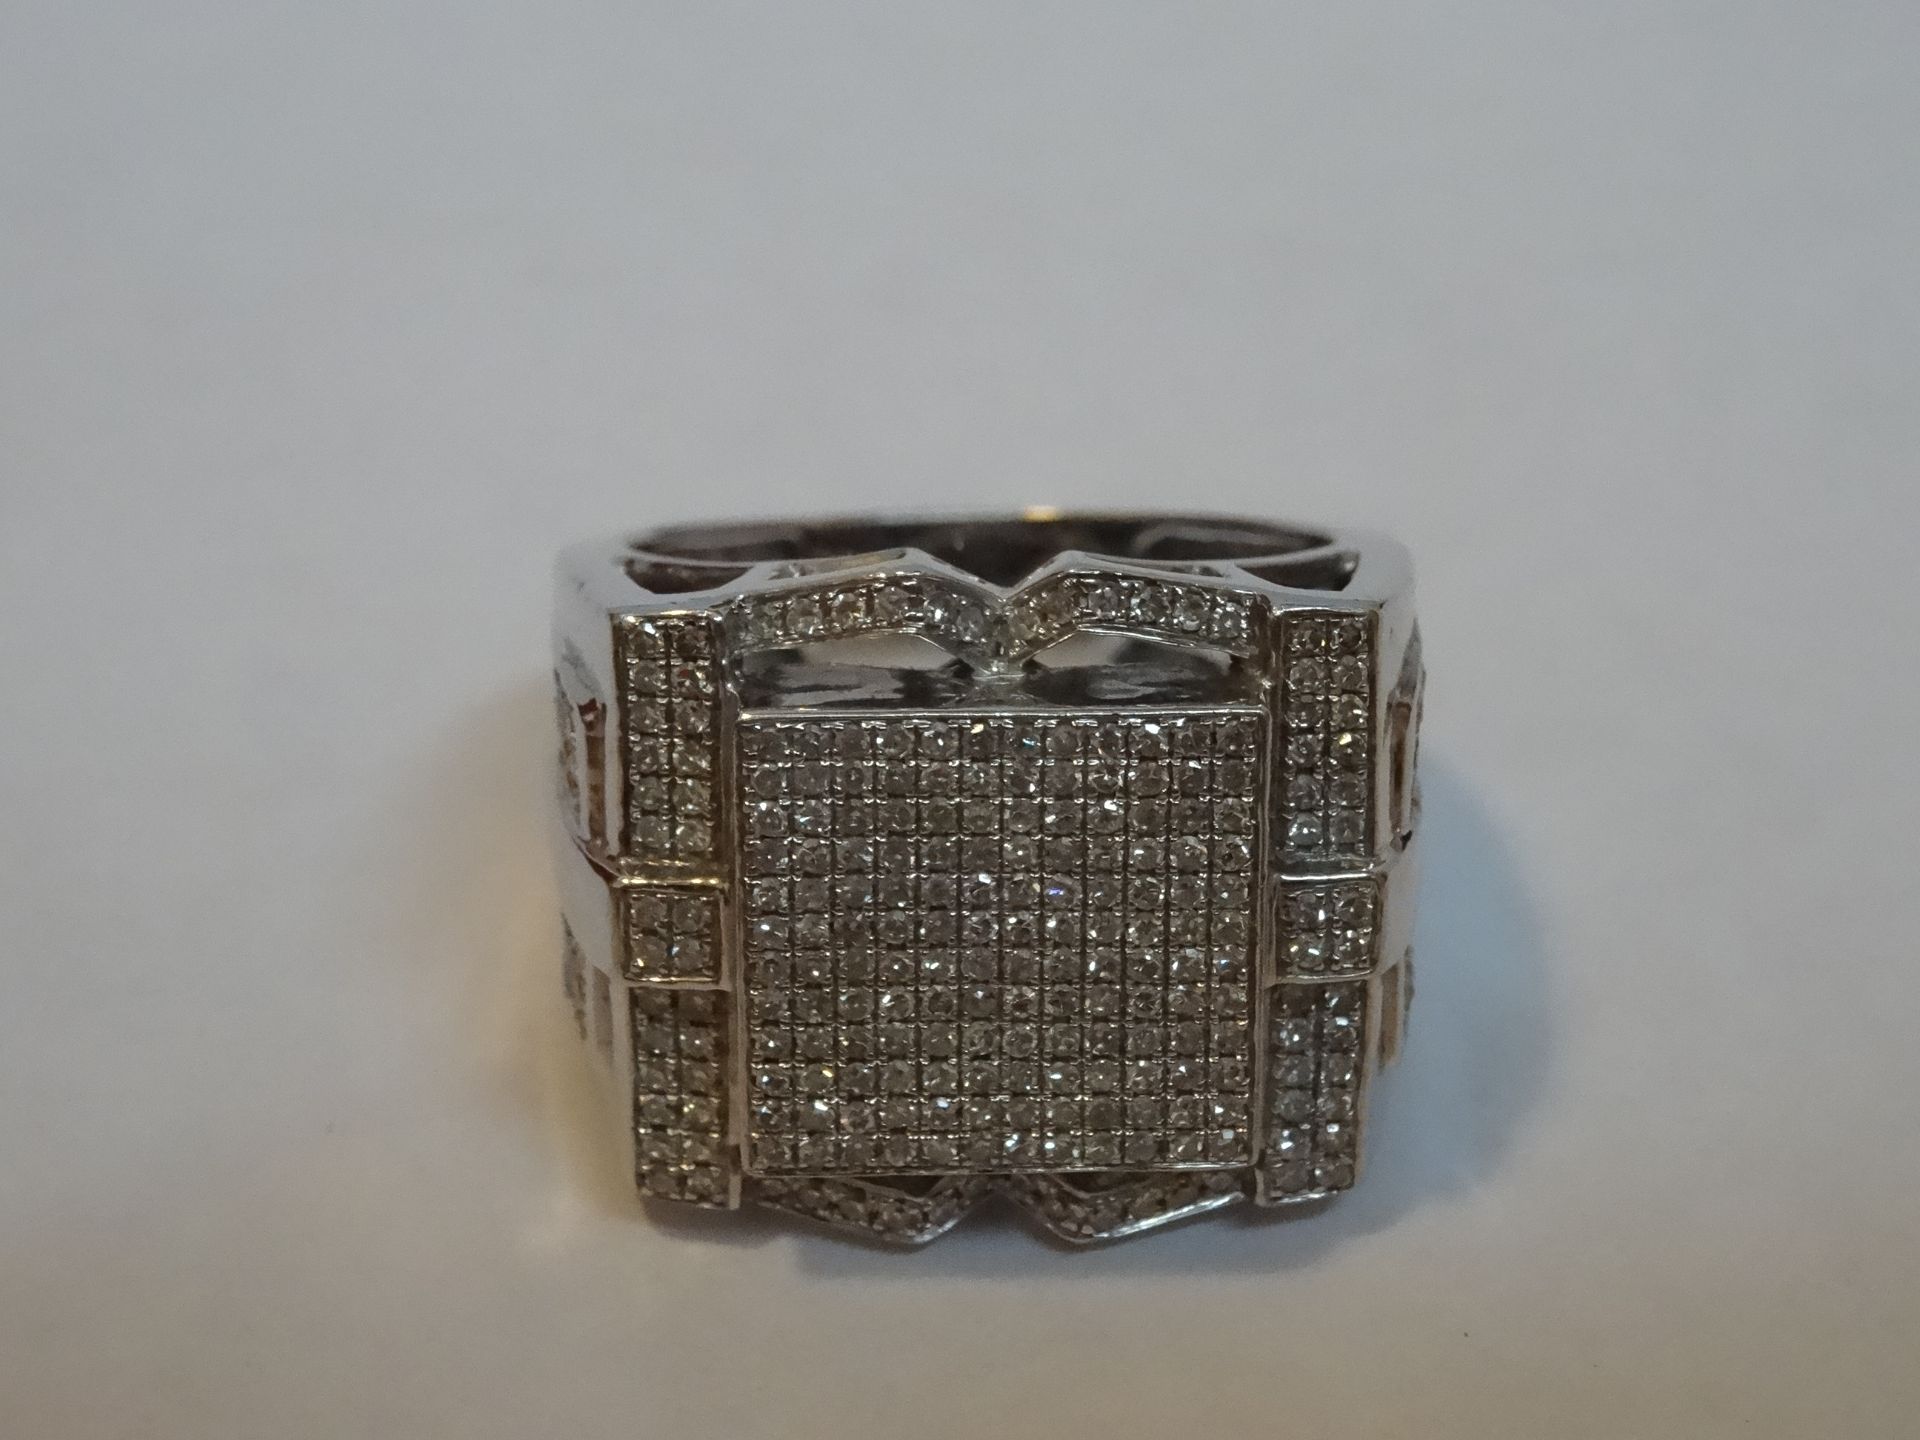 9 Carat White Gold Gents Signet Ring. Contains 1.55 Carats of Diamonds. Insurance valuation '£1800' - Image 3 of 6